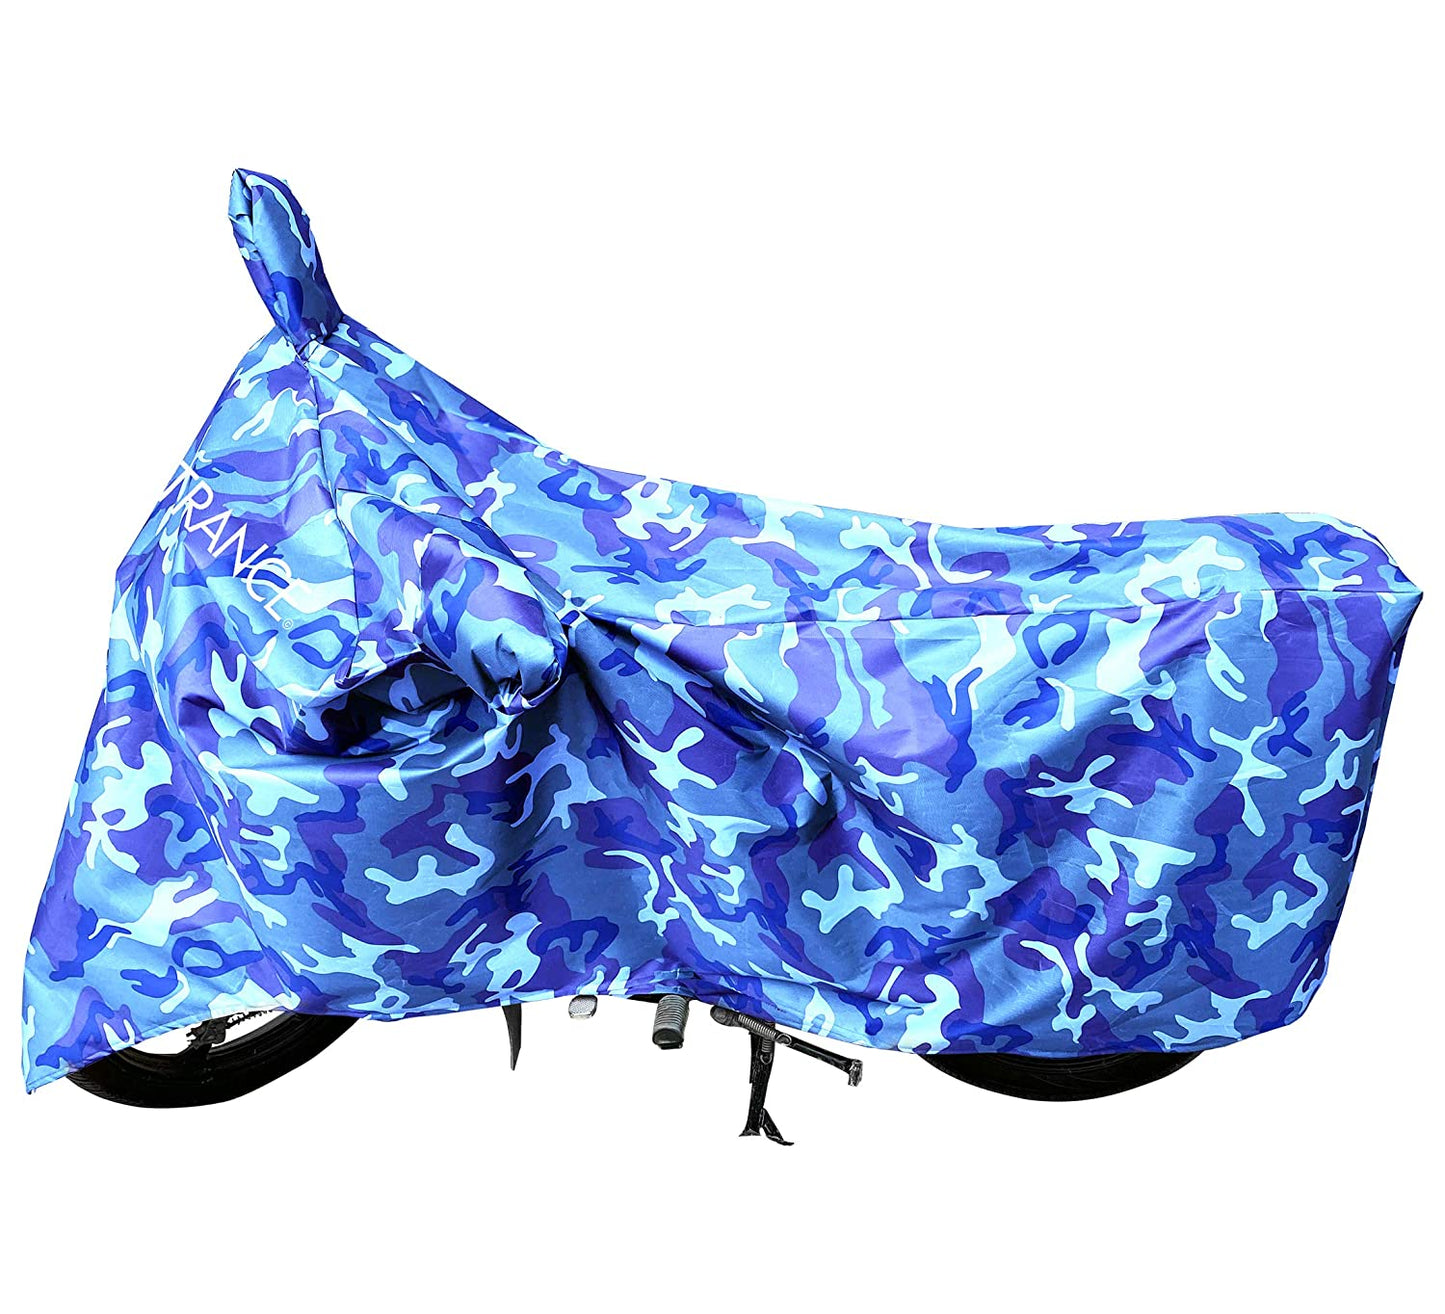 MotoTrance Jungle Bike Body Covers For Royal Enfield Classic 350 - Interlock-Stitched Waterproof and Heat Resistant with Mirror Pockets